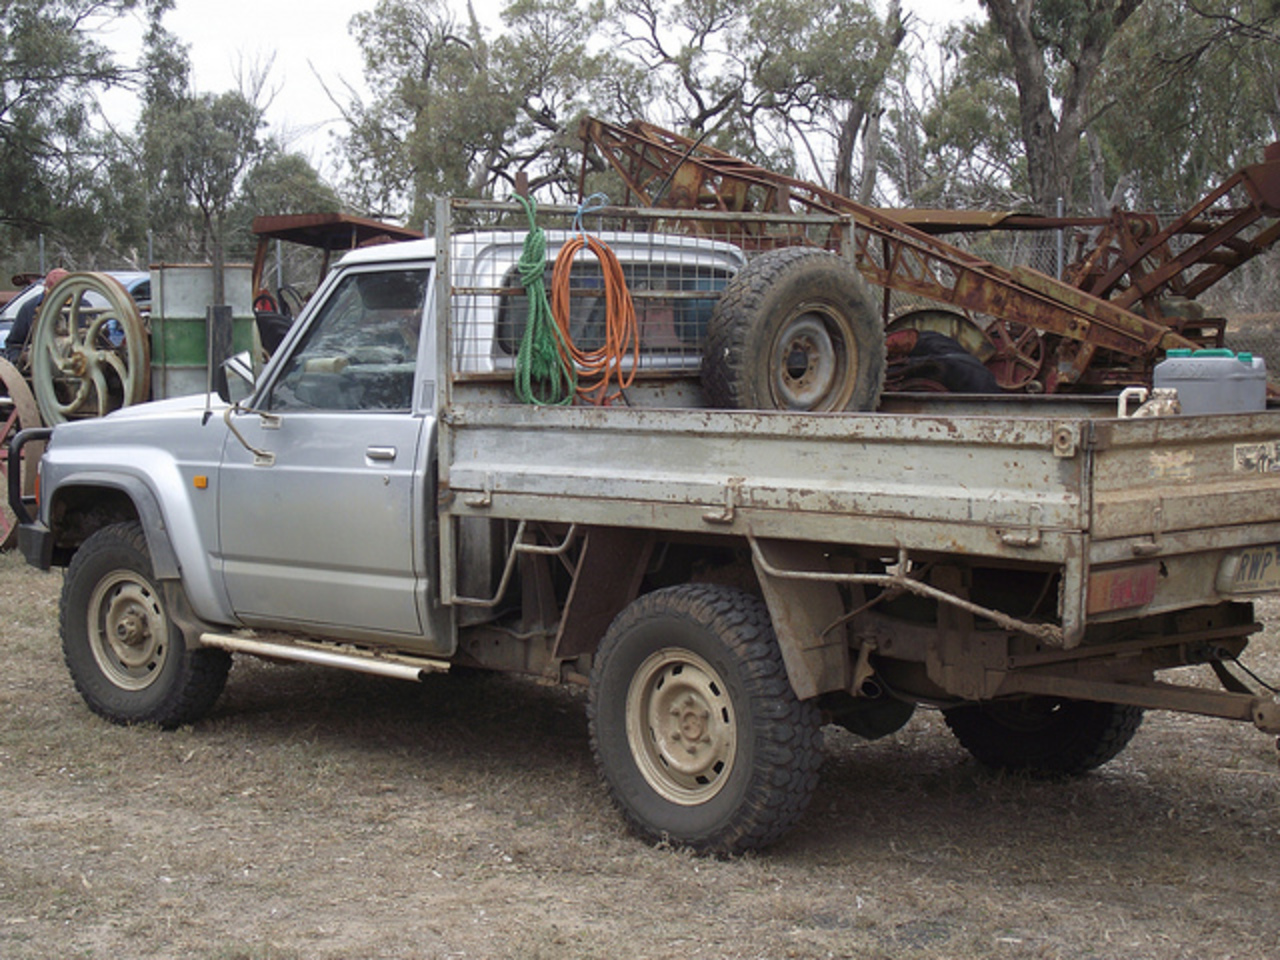 Another Ute out the back of the Museum, a 1992 Nissan Patrol 4x4 Ute.